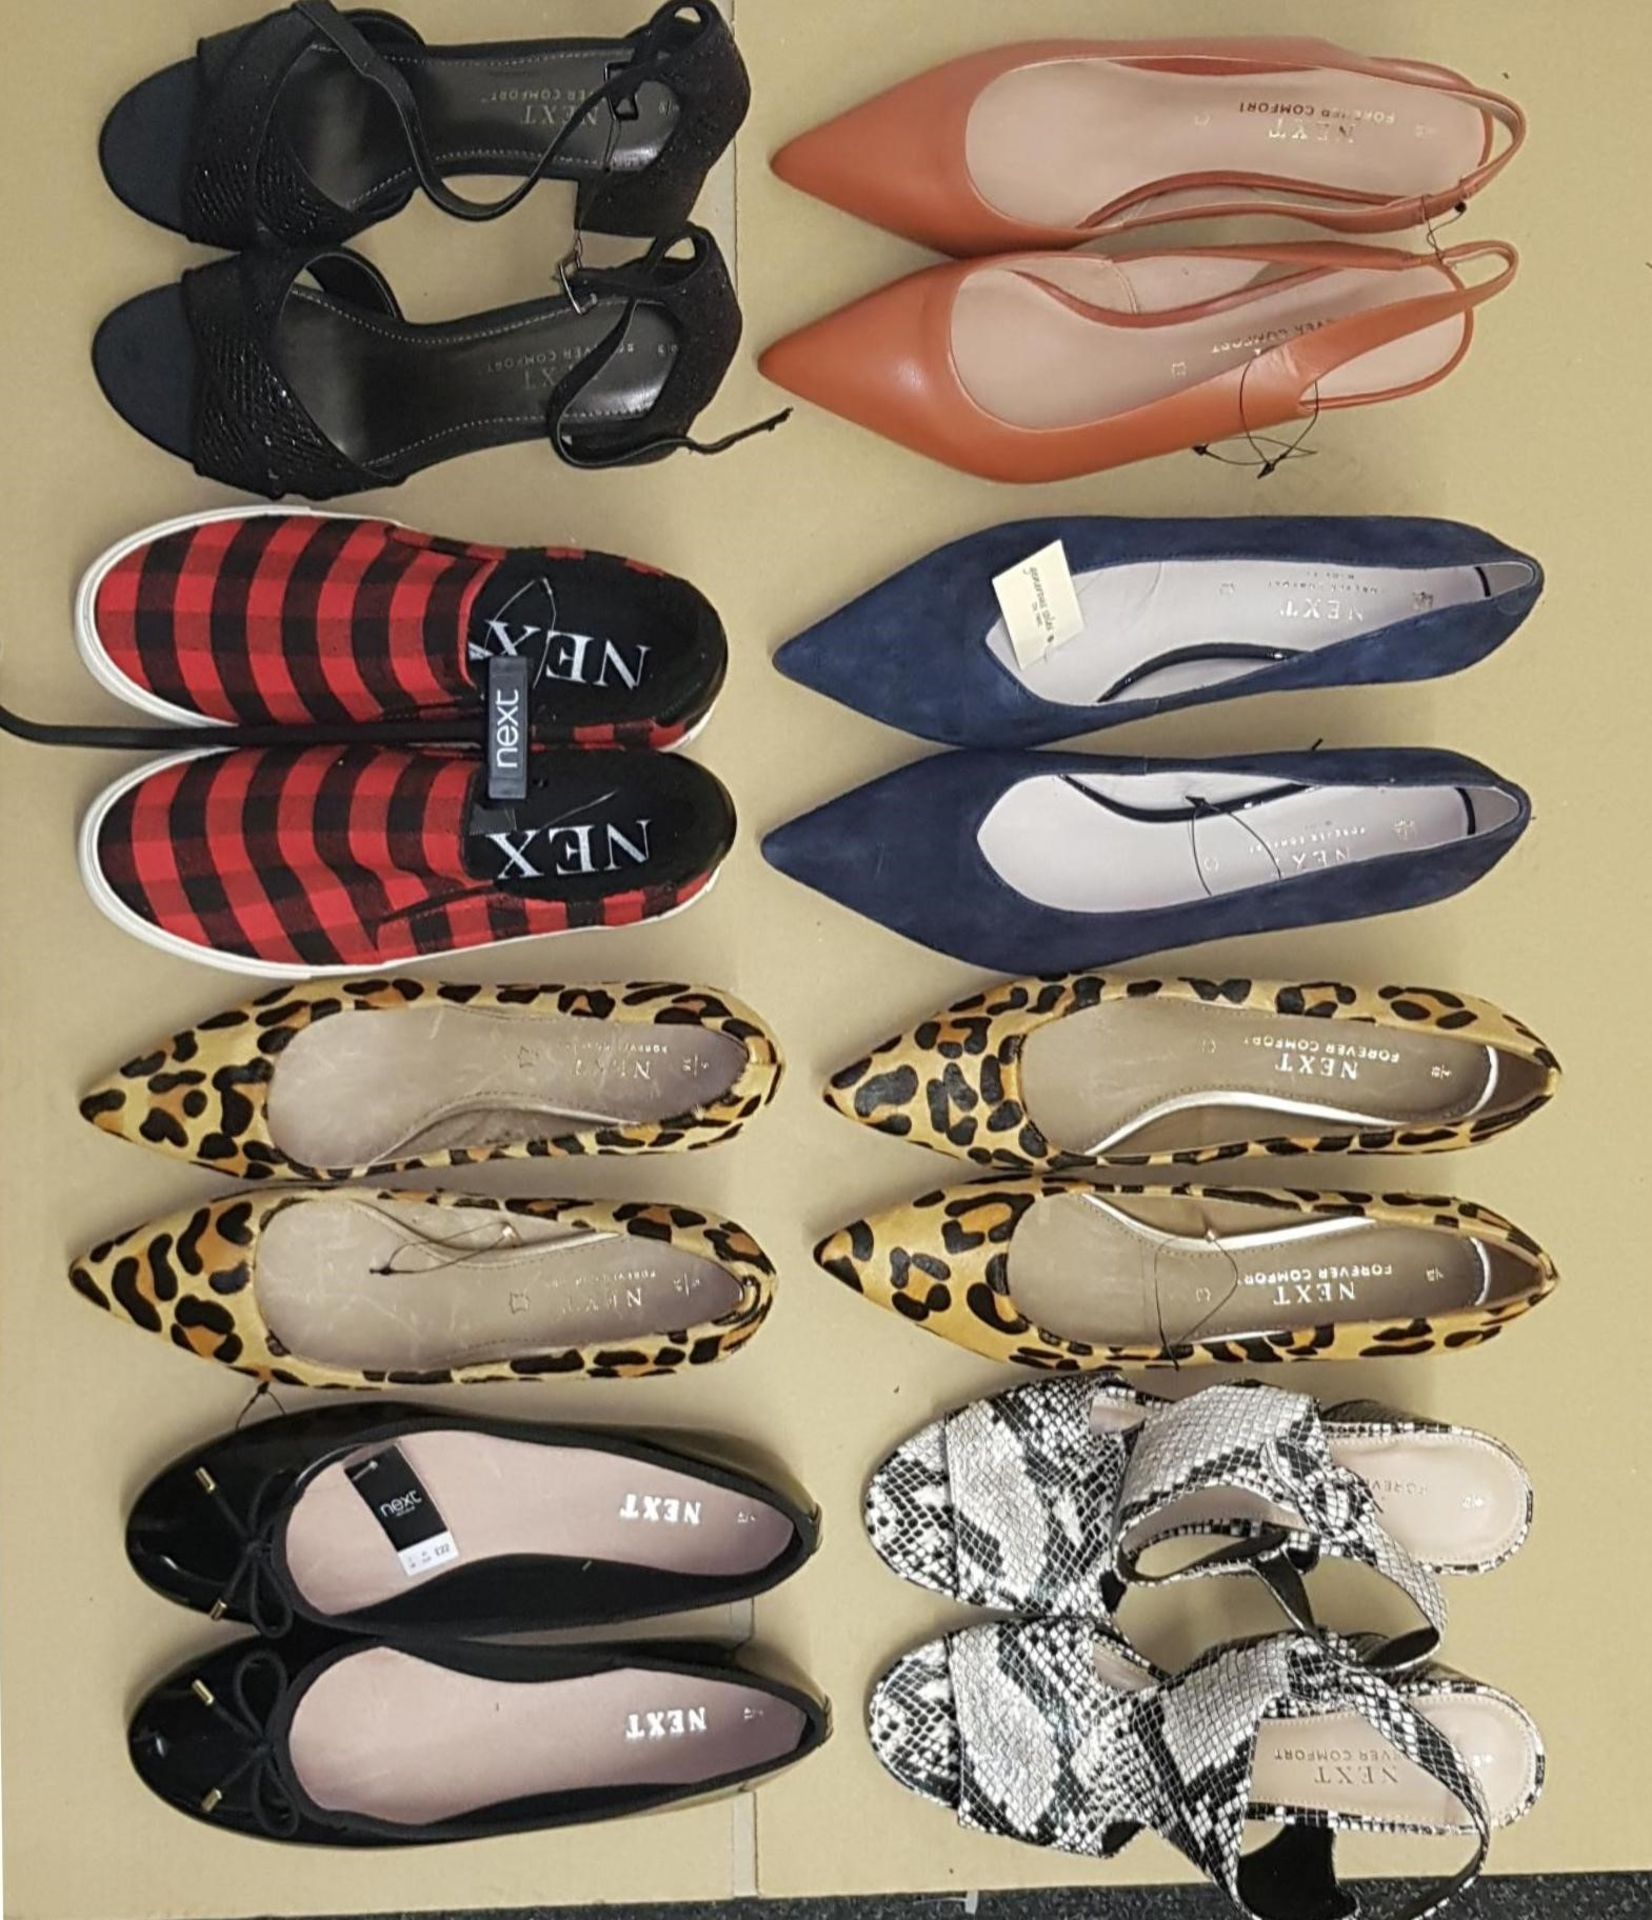 ONE LOT TO CONTAIN 8 ITEMS - SHOES COMBINED RRP £290 (1068)Condition ReportALL ITEMS ARE BRAND NEW - Image 2 of 2